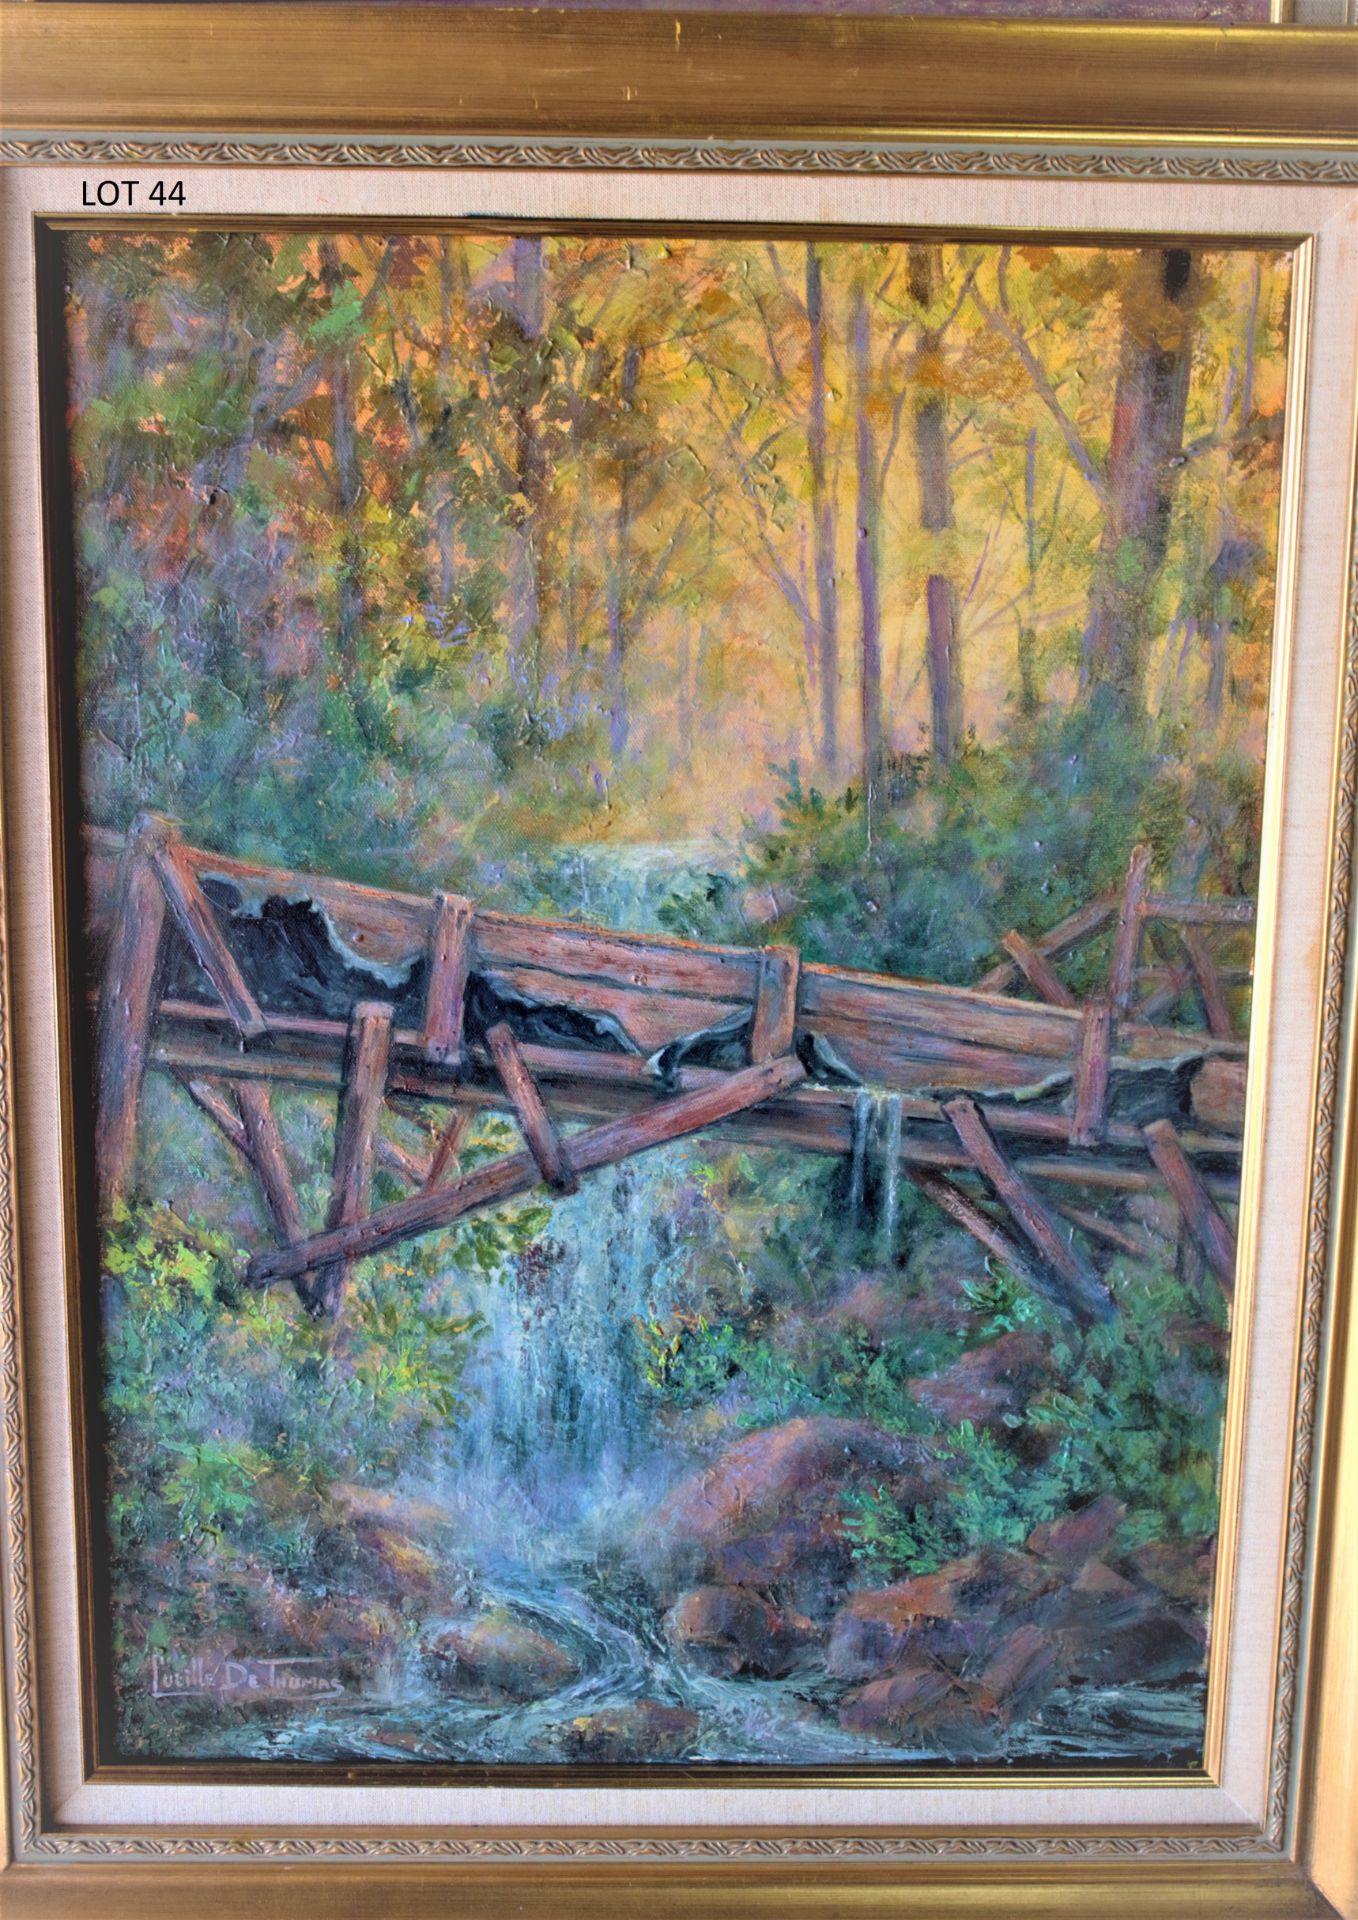 OLD WATER SLUICE 18" X 24" OIL SIGNED